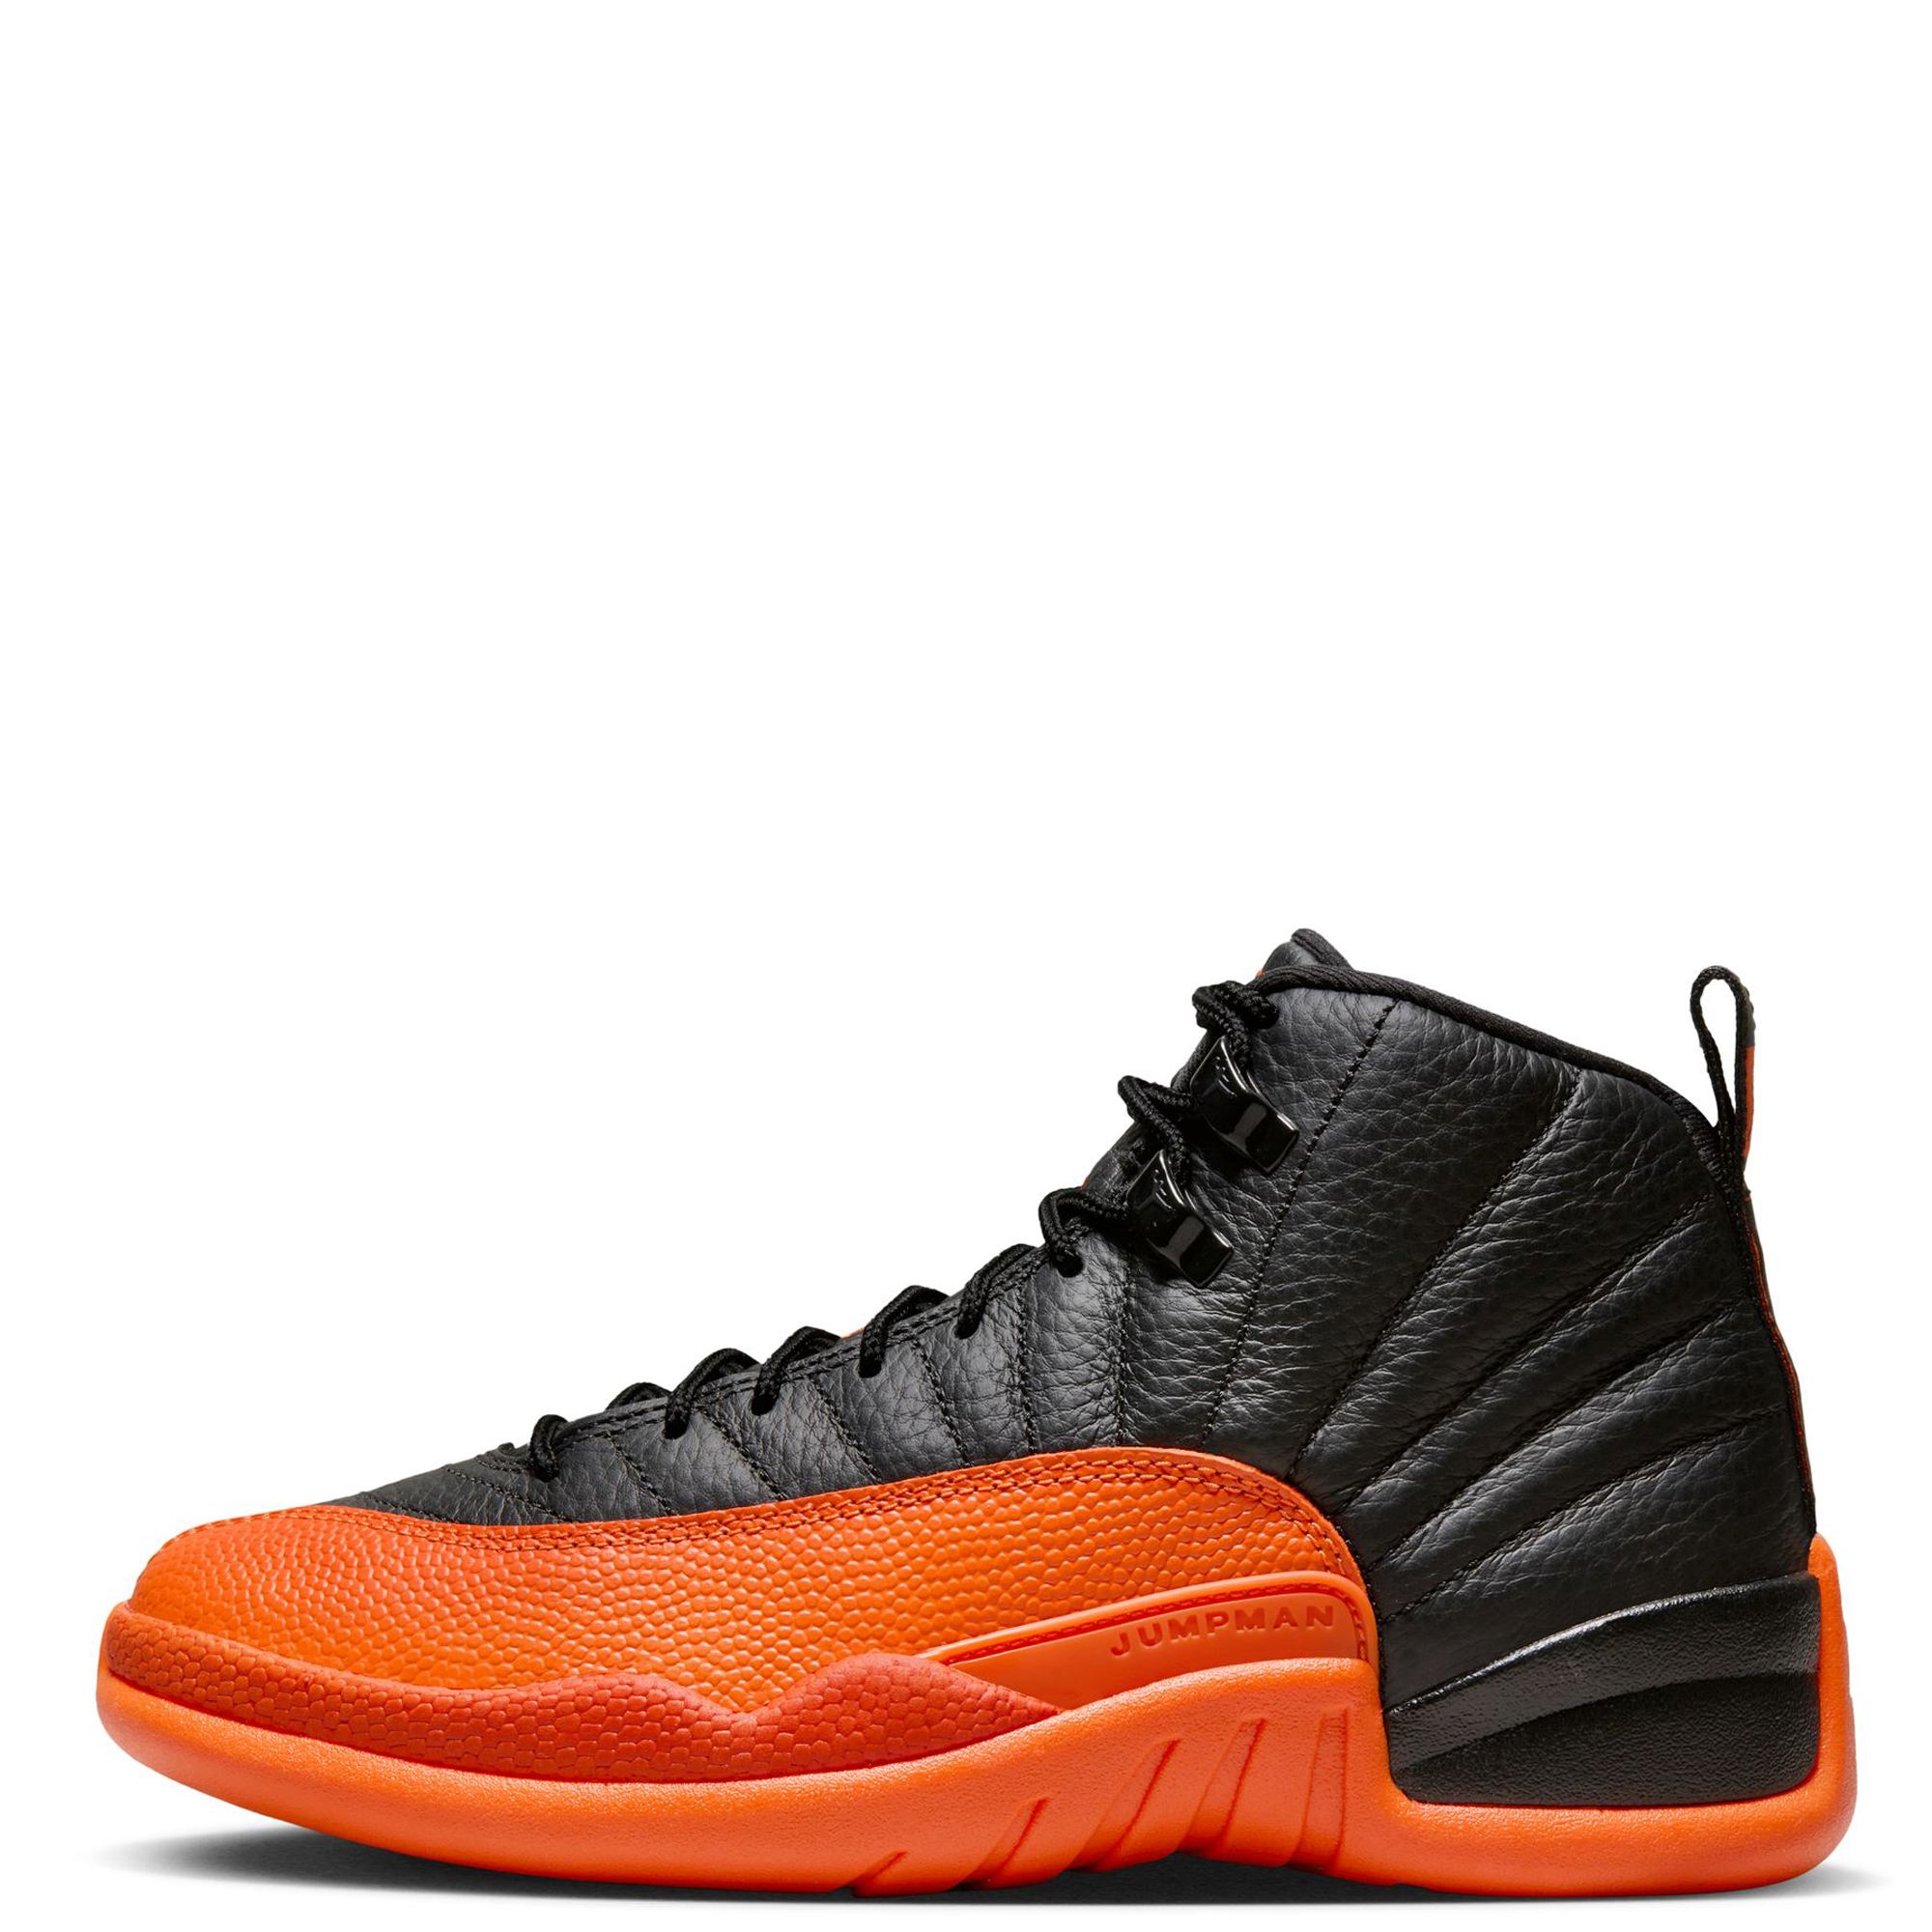 JORDAN 12 LOW MAX ORANGE EARLY ON FOOT ! UP CLOSE / REVIEW 